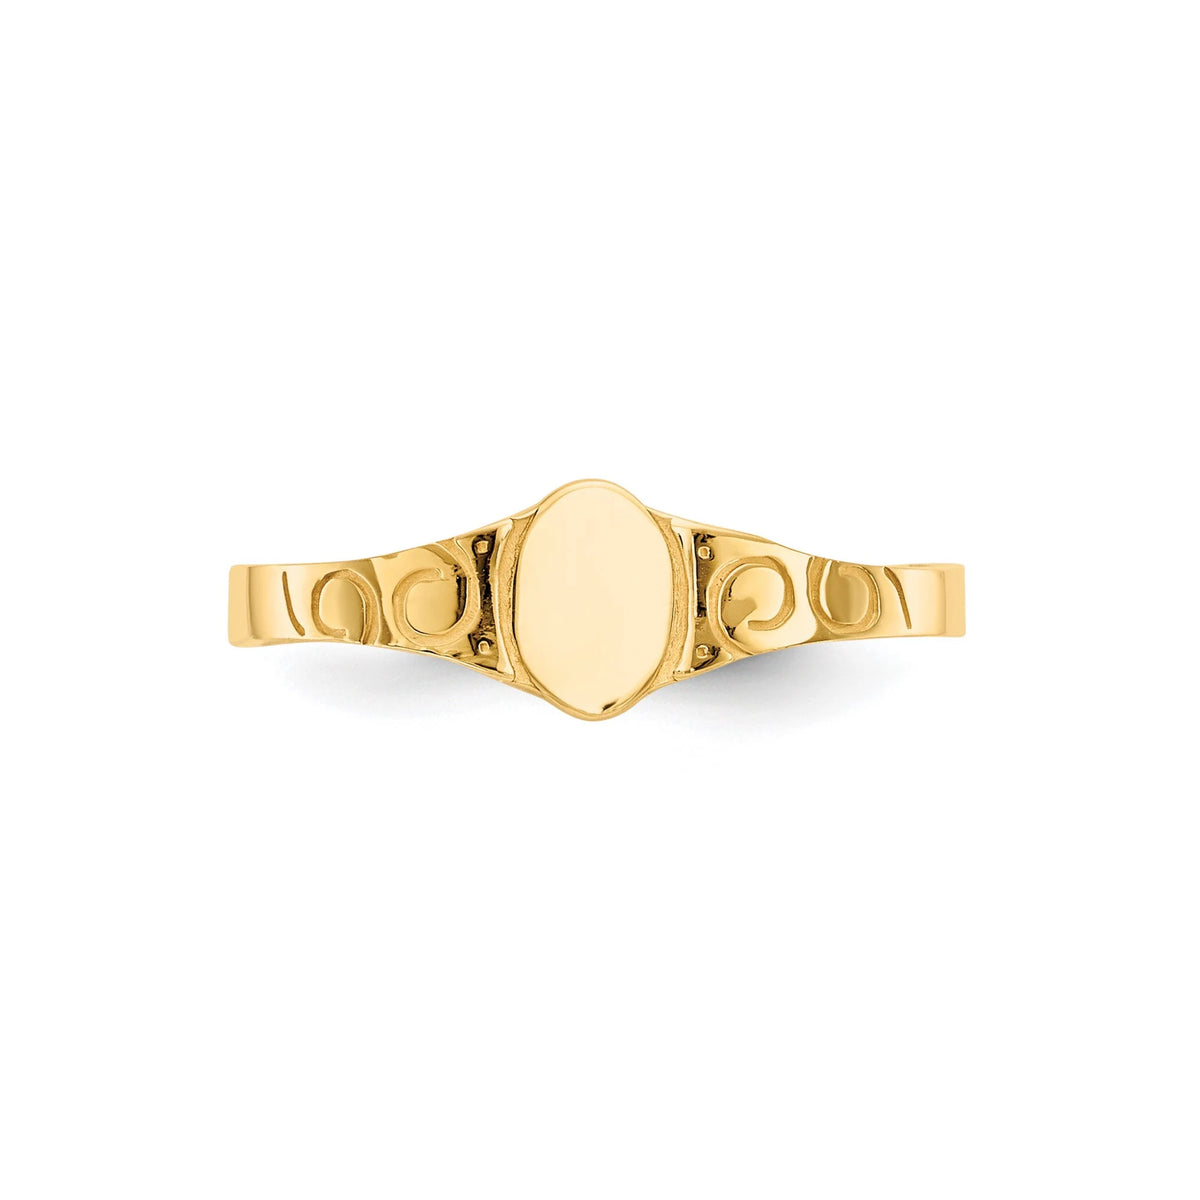 Genuine 14k Yellow Gold Oval Signet Ring Baby to Toddler / Band Size 1- 4 (1-5 year olds) Toddler Size Children's Ring Band - Gift Box